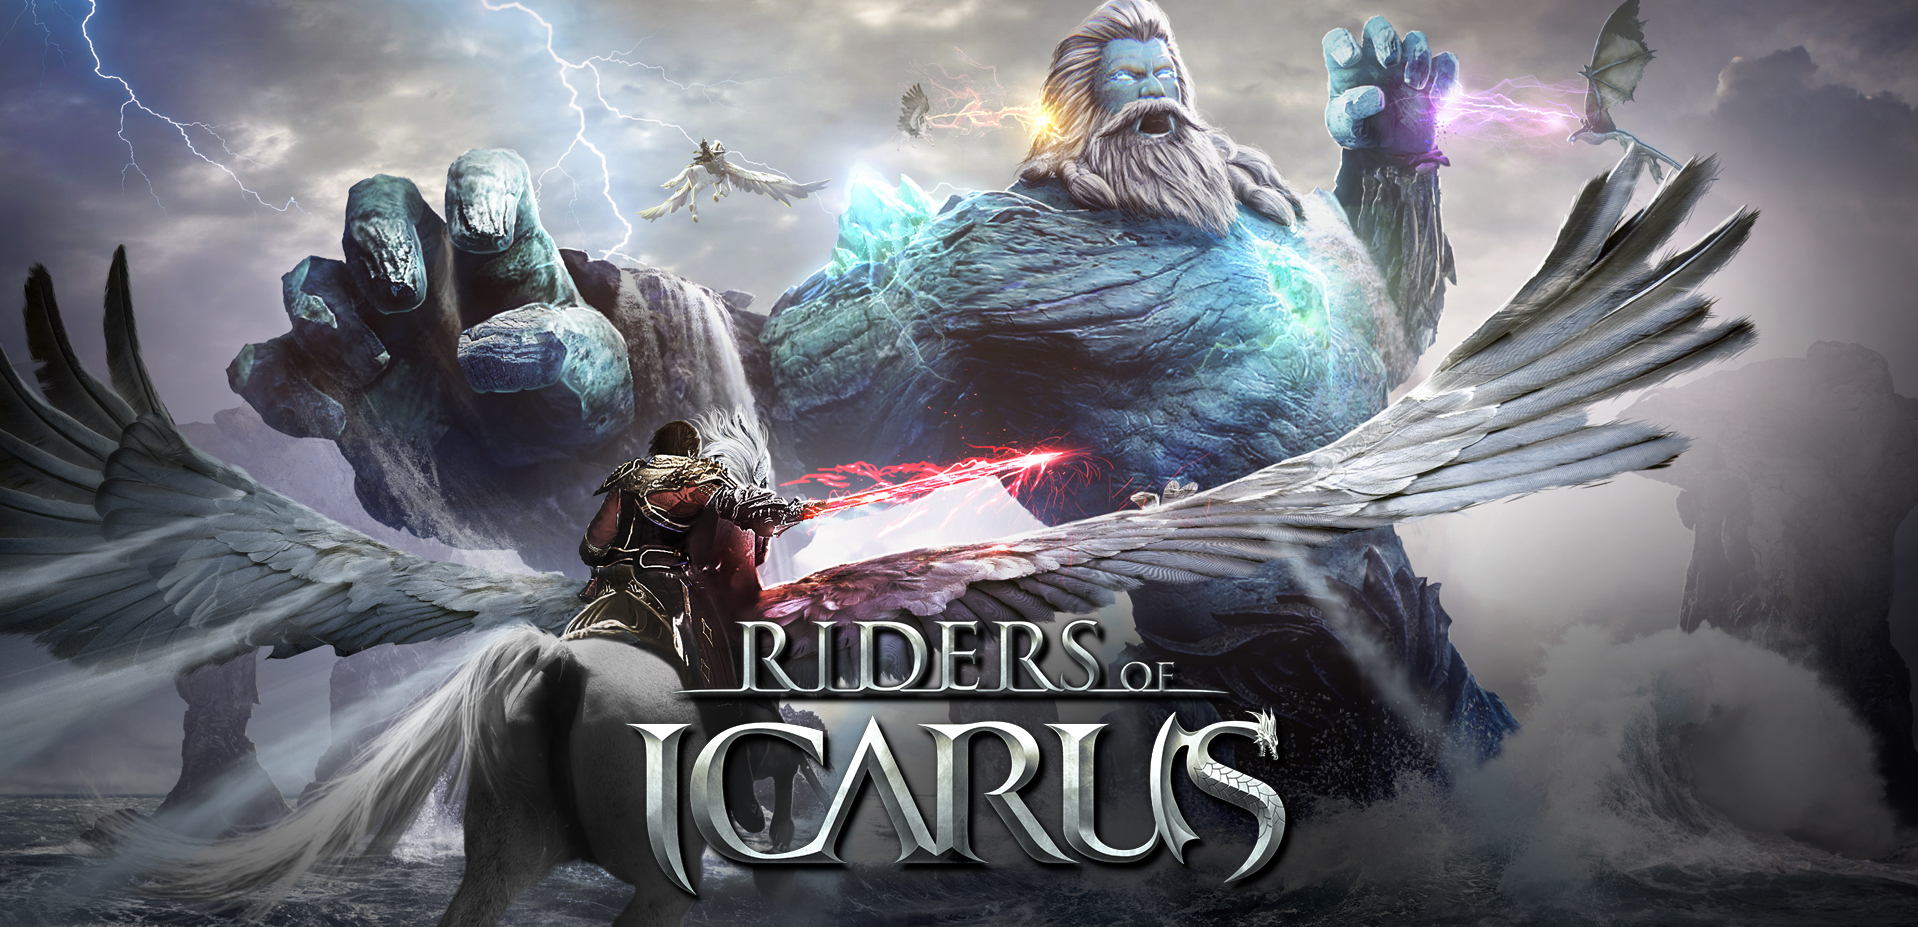 Riders of Icarus is Going Play to Earn Aboard the Wemix Platform